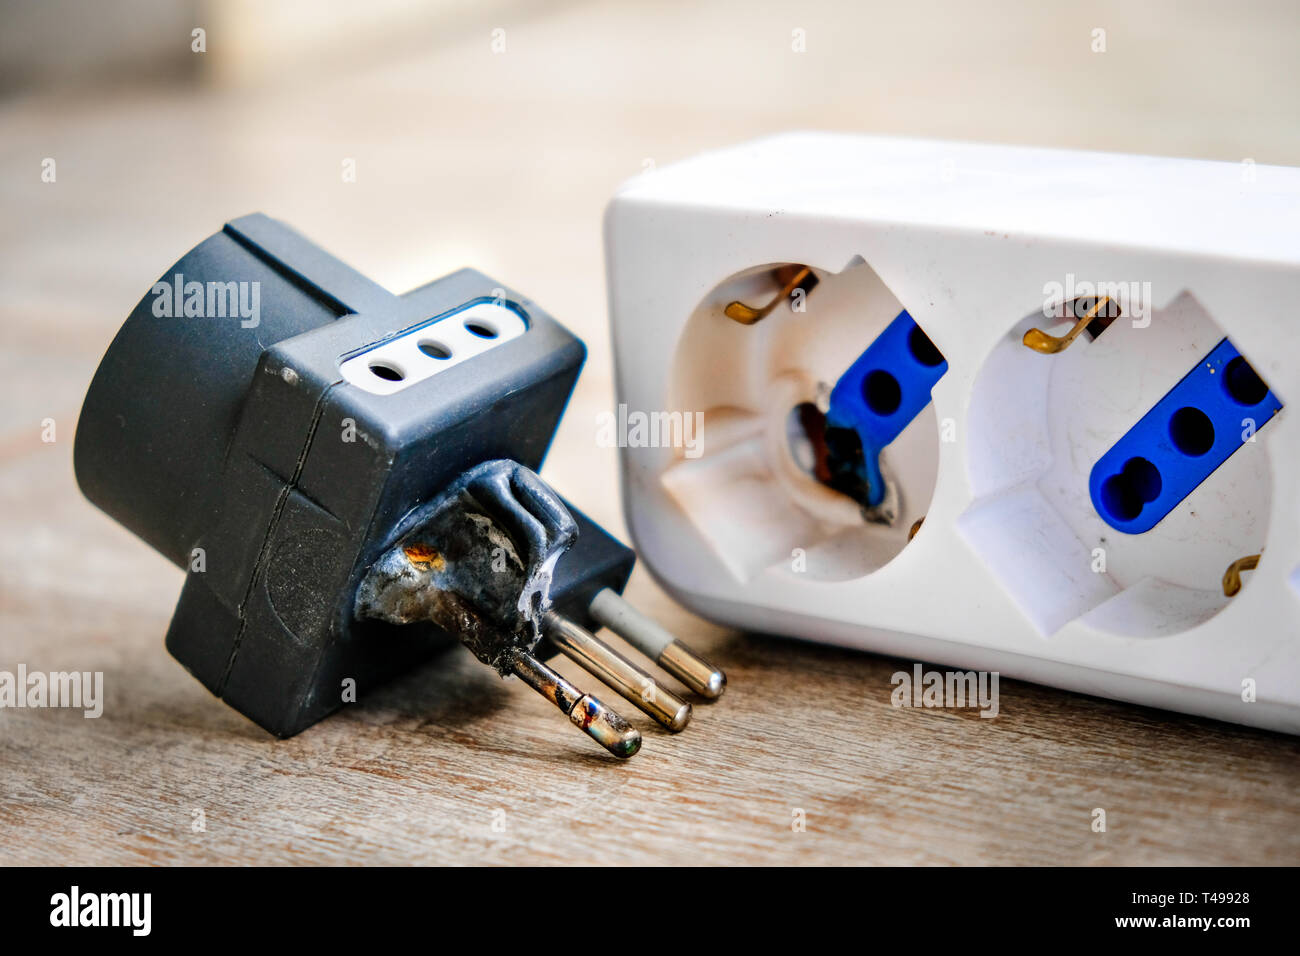 A burnt power strip melted plastic for electrocution danger Stock Photo